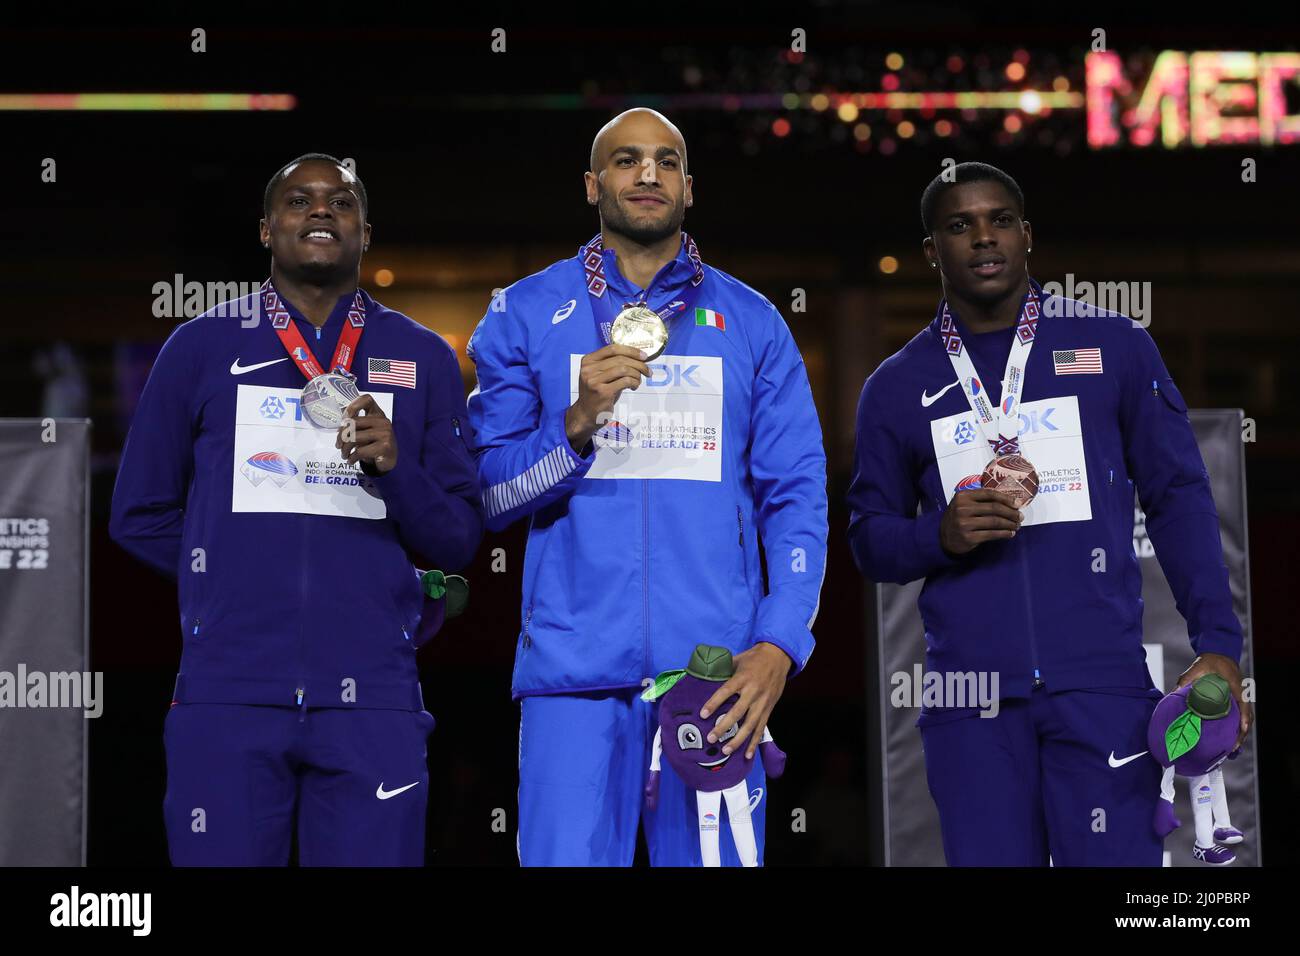 Belgrade, Serbia. 20th Mar, 2022. Gold medalist Lamont Marcell Jacobs (C) of Italy, silver medalist Christian Coleman (L) and bronze medalist Marvin Bracy of the United States pose for photos during the awarding ceremony for men's 60m hurdles of the World Athletics Indoor Championships Belgrade 2022 in Stark Arena, Belgrade, Serbia, March 20, 2022. Credit: Zheng Huansong/Xinhua/Alamy Live News Stock Photo